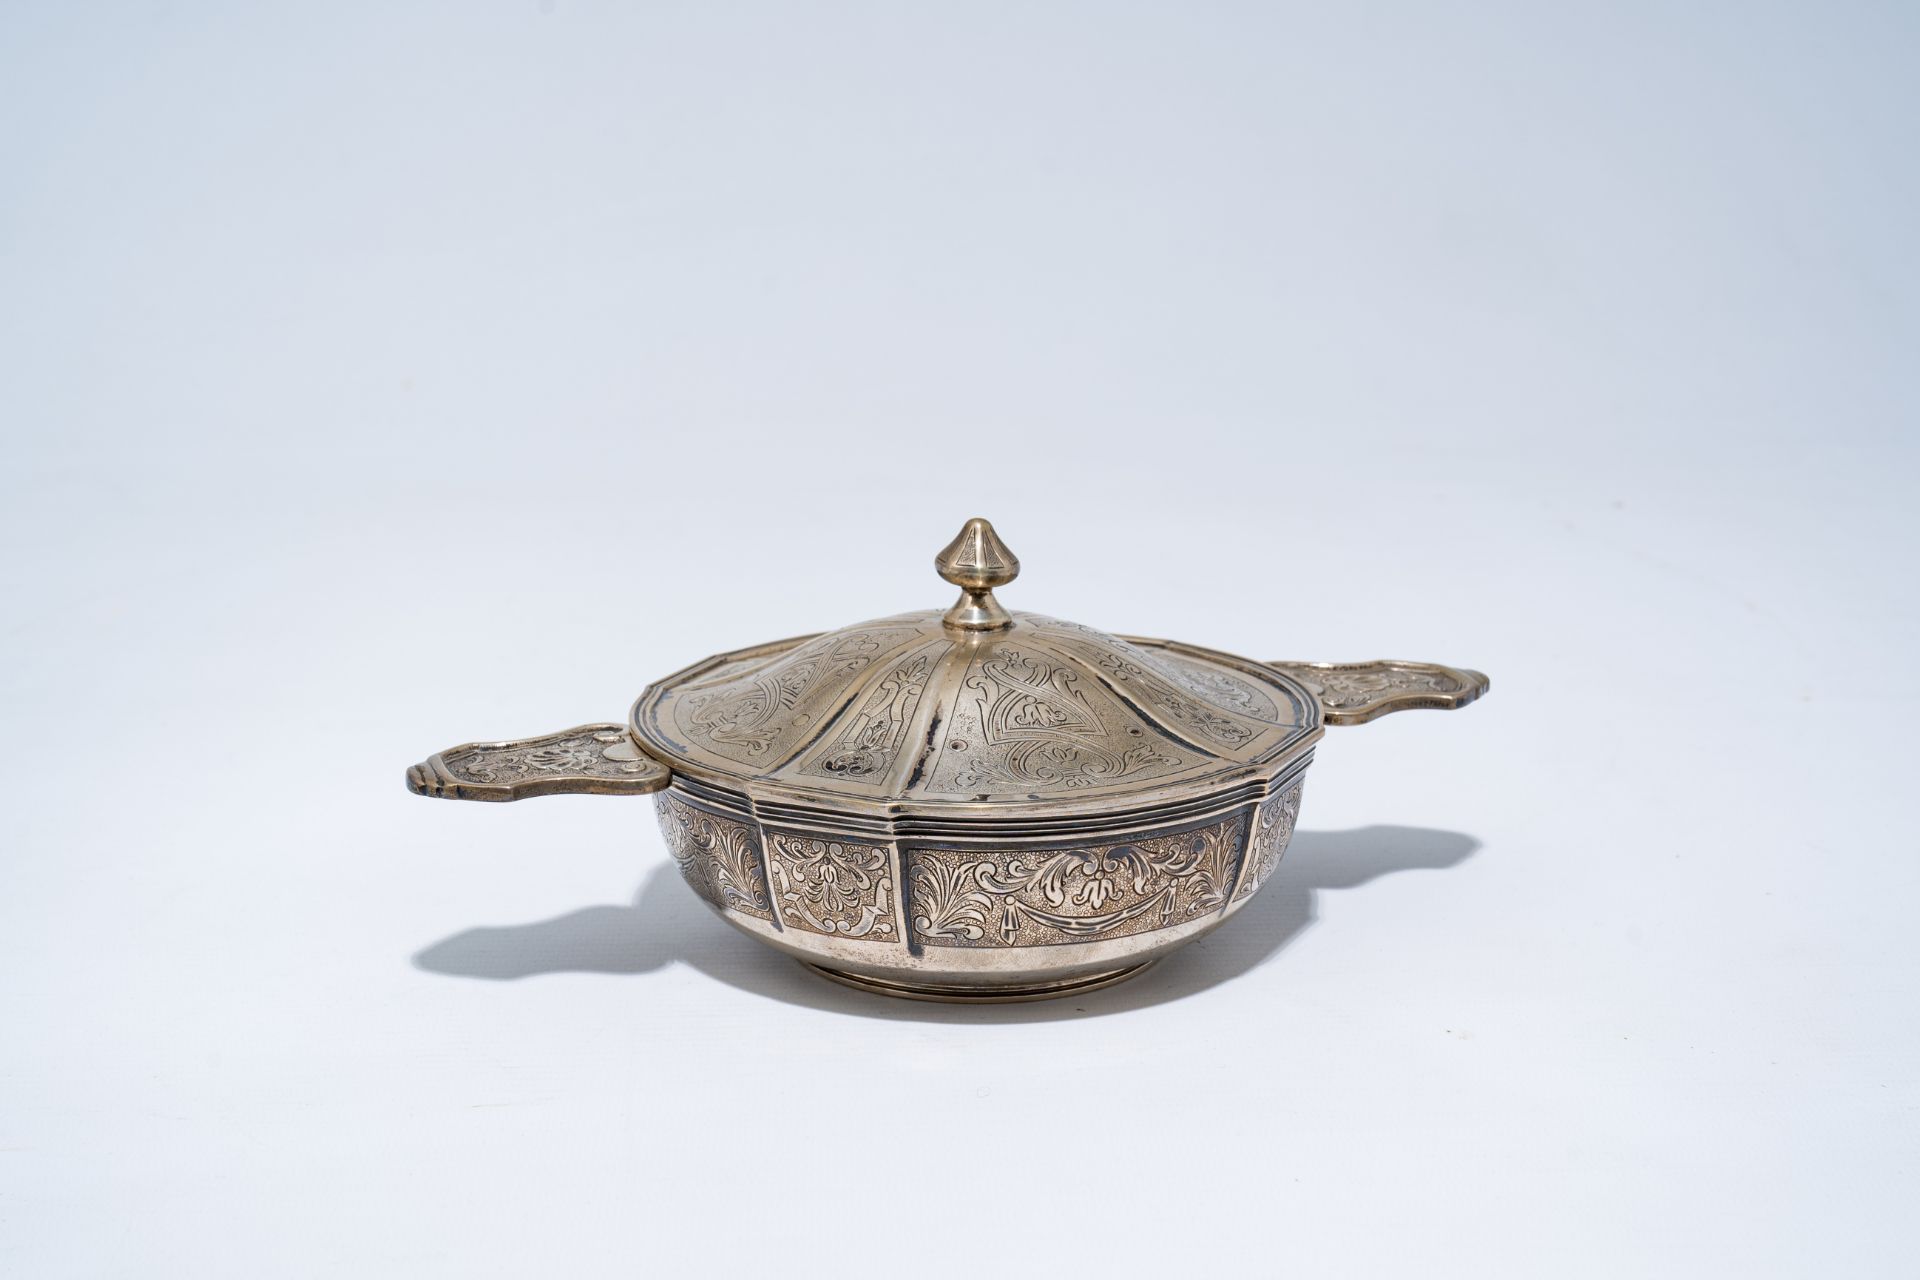 A Belgian silver bowl and cover with floral design, maker's mark Wolfers, 800/000, 20th C.